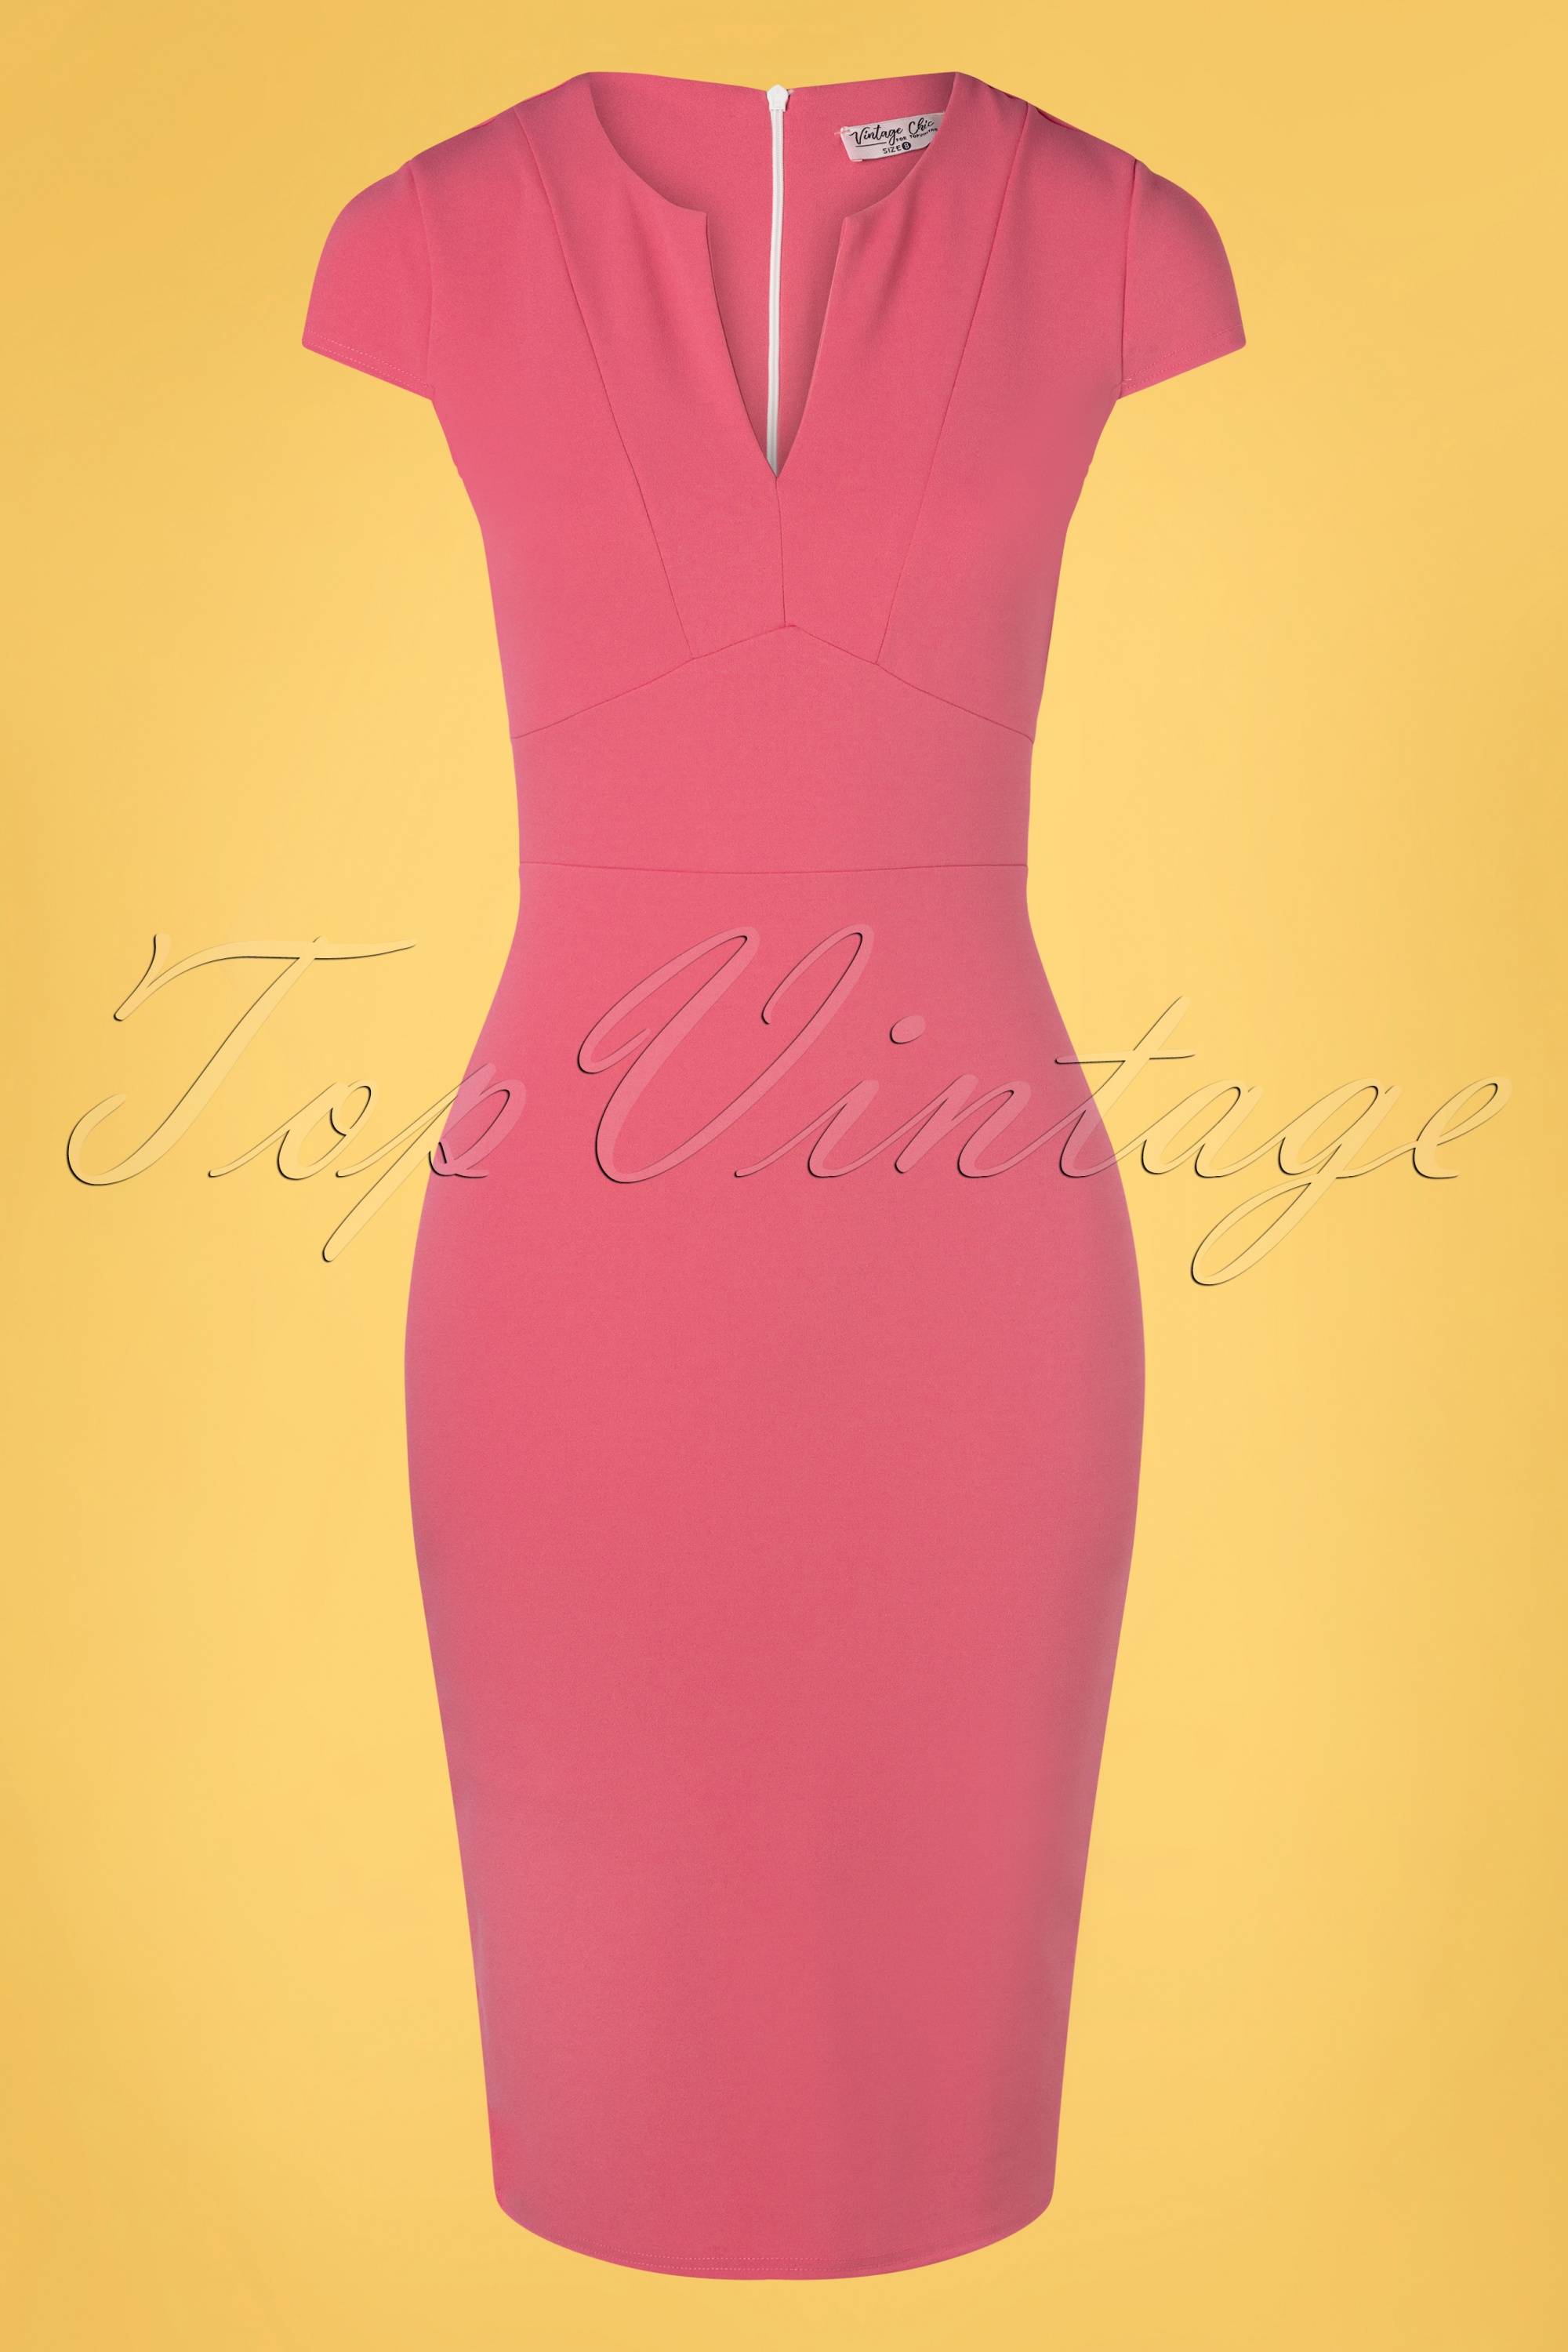 Vintage Chic for Topvintage - Rose pencil jurk in roze 